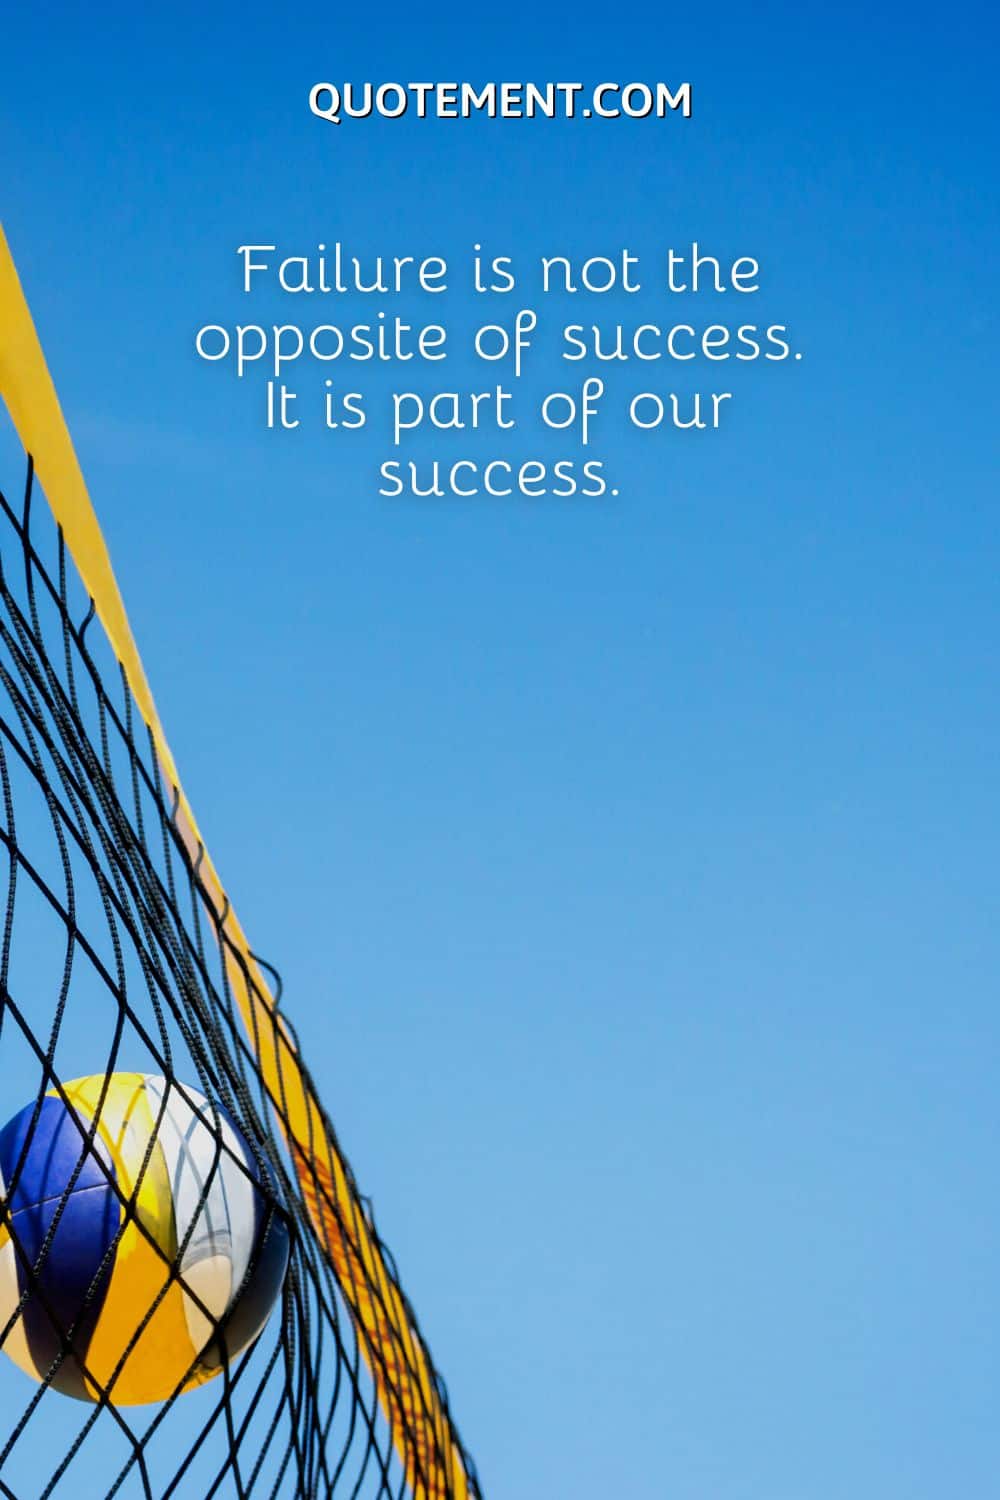 Failure is not the opposite of success. It is part of our success.